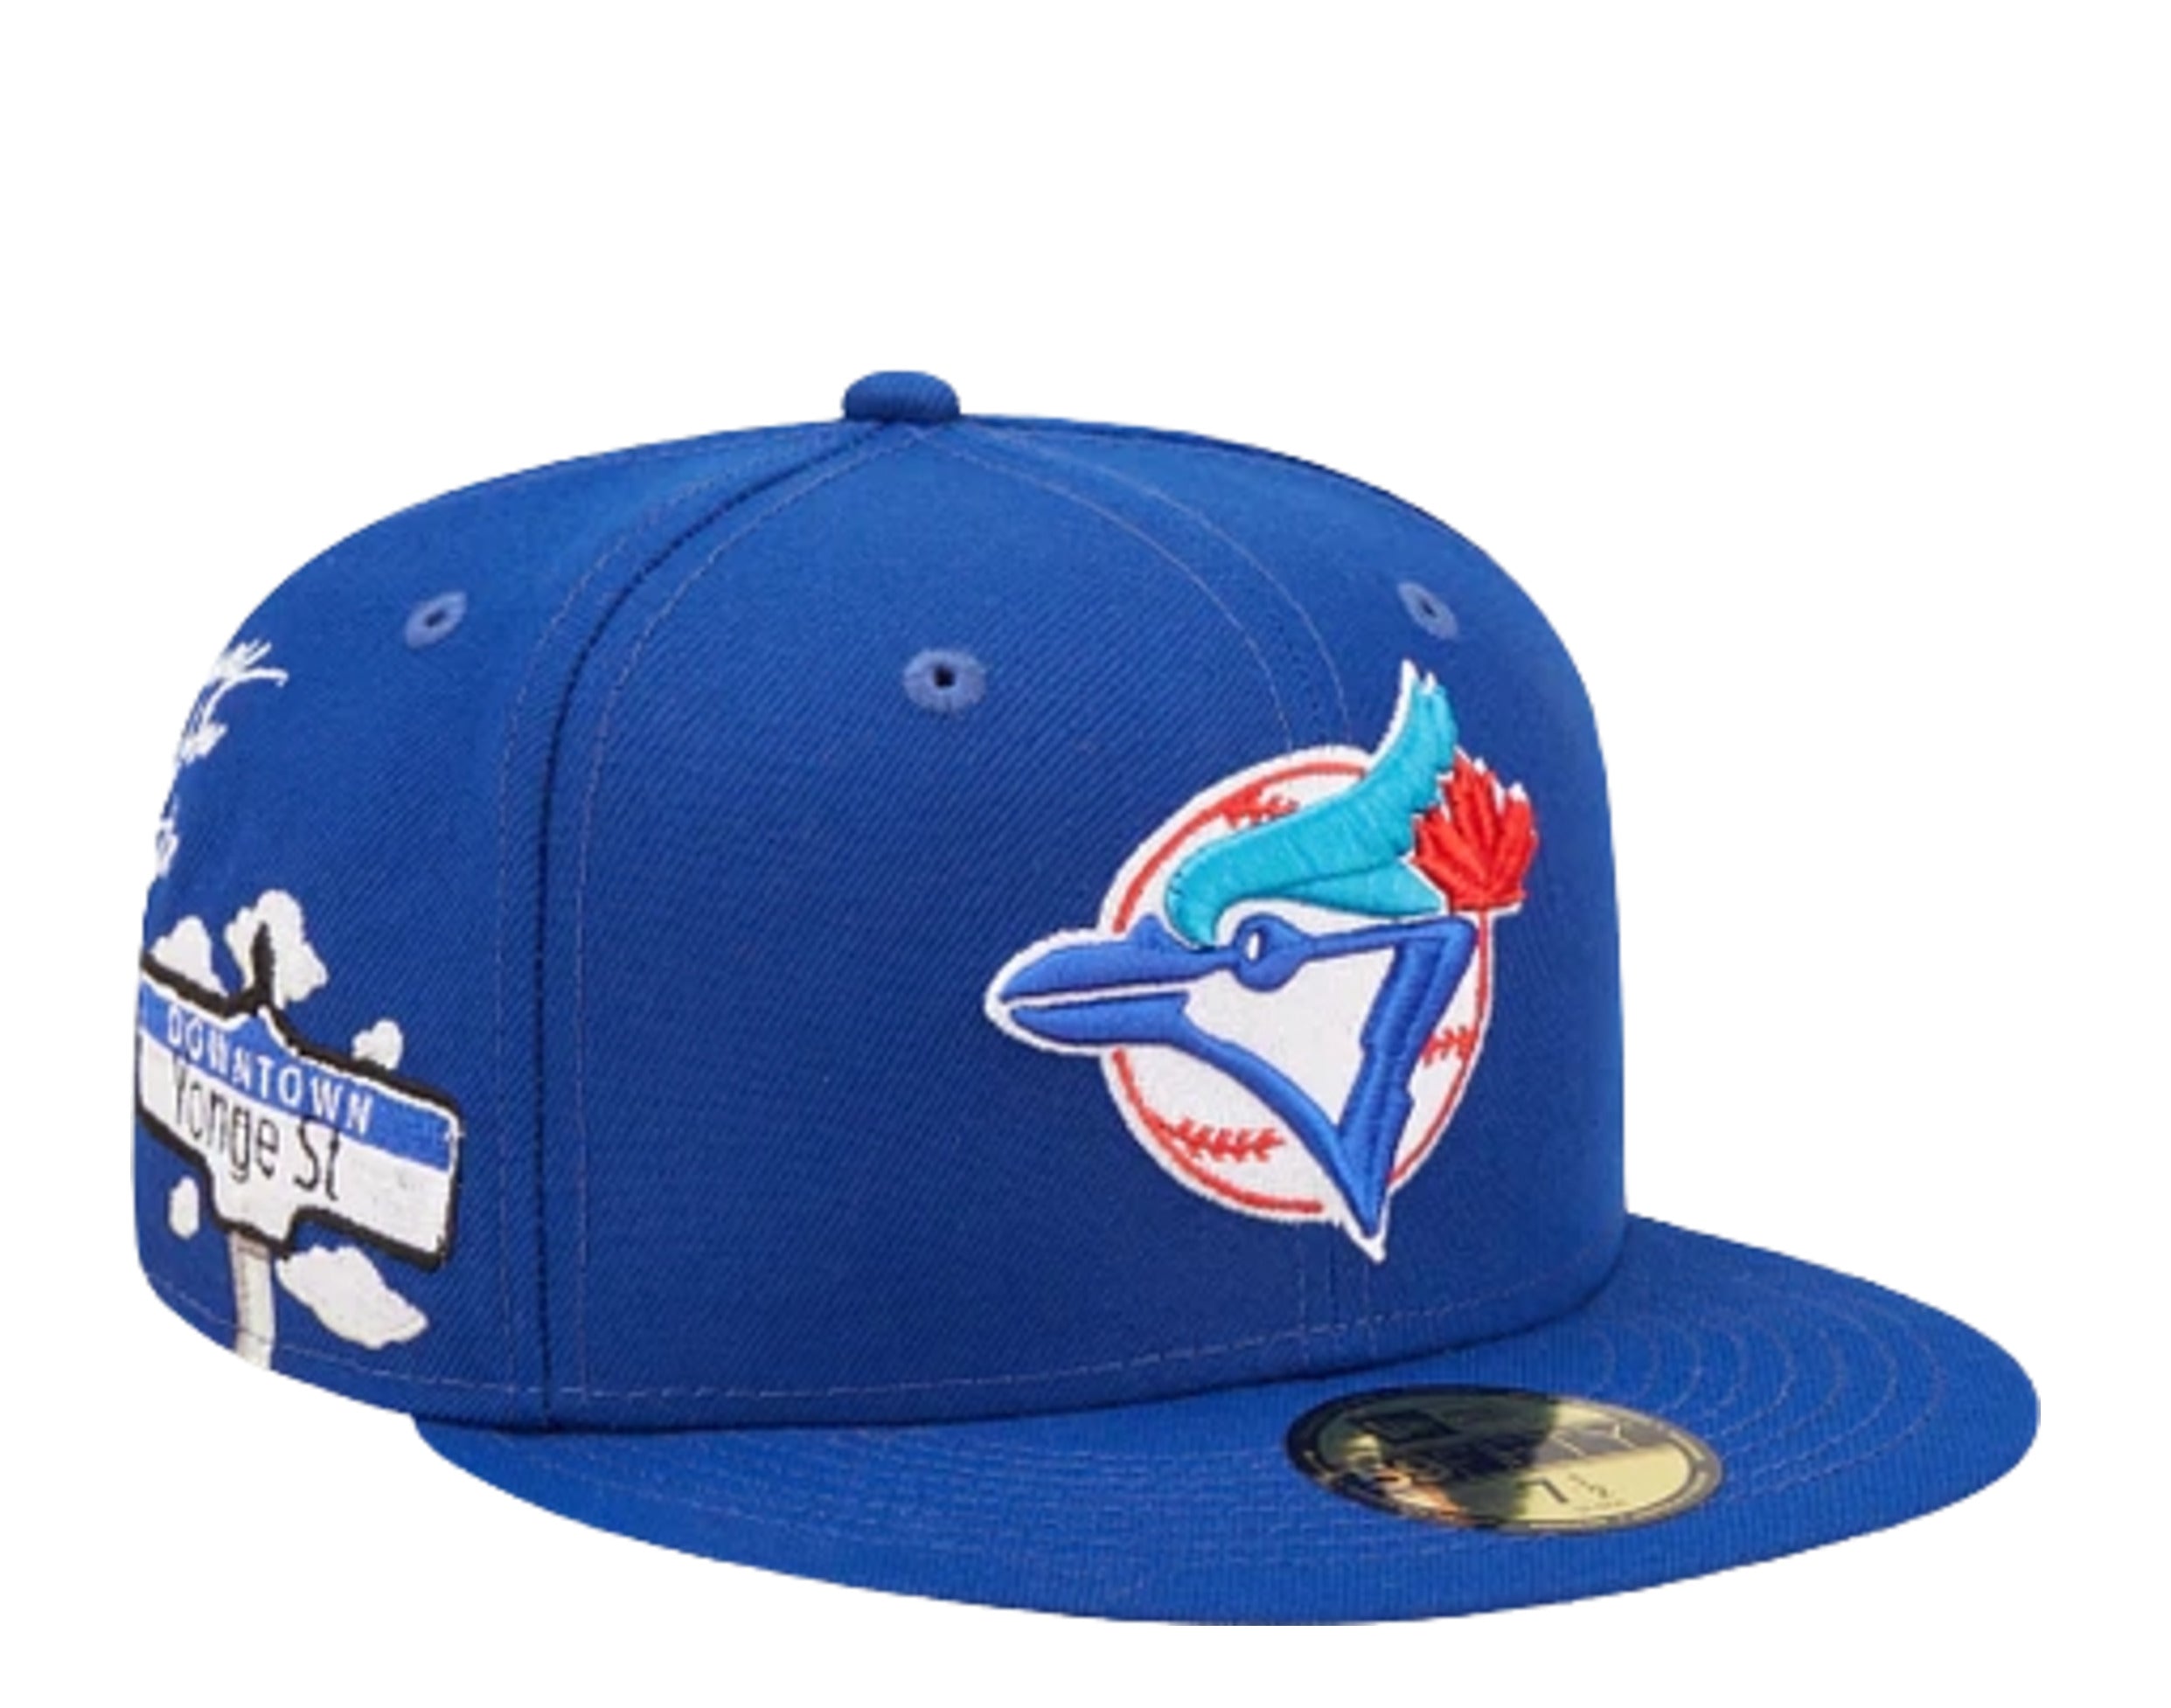 Toronto Blue Jays Fitted Hats  Toronto Blue Jays Fitted Baseball Caps